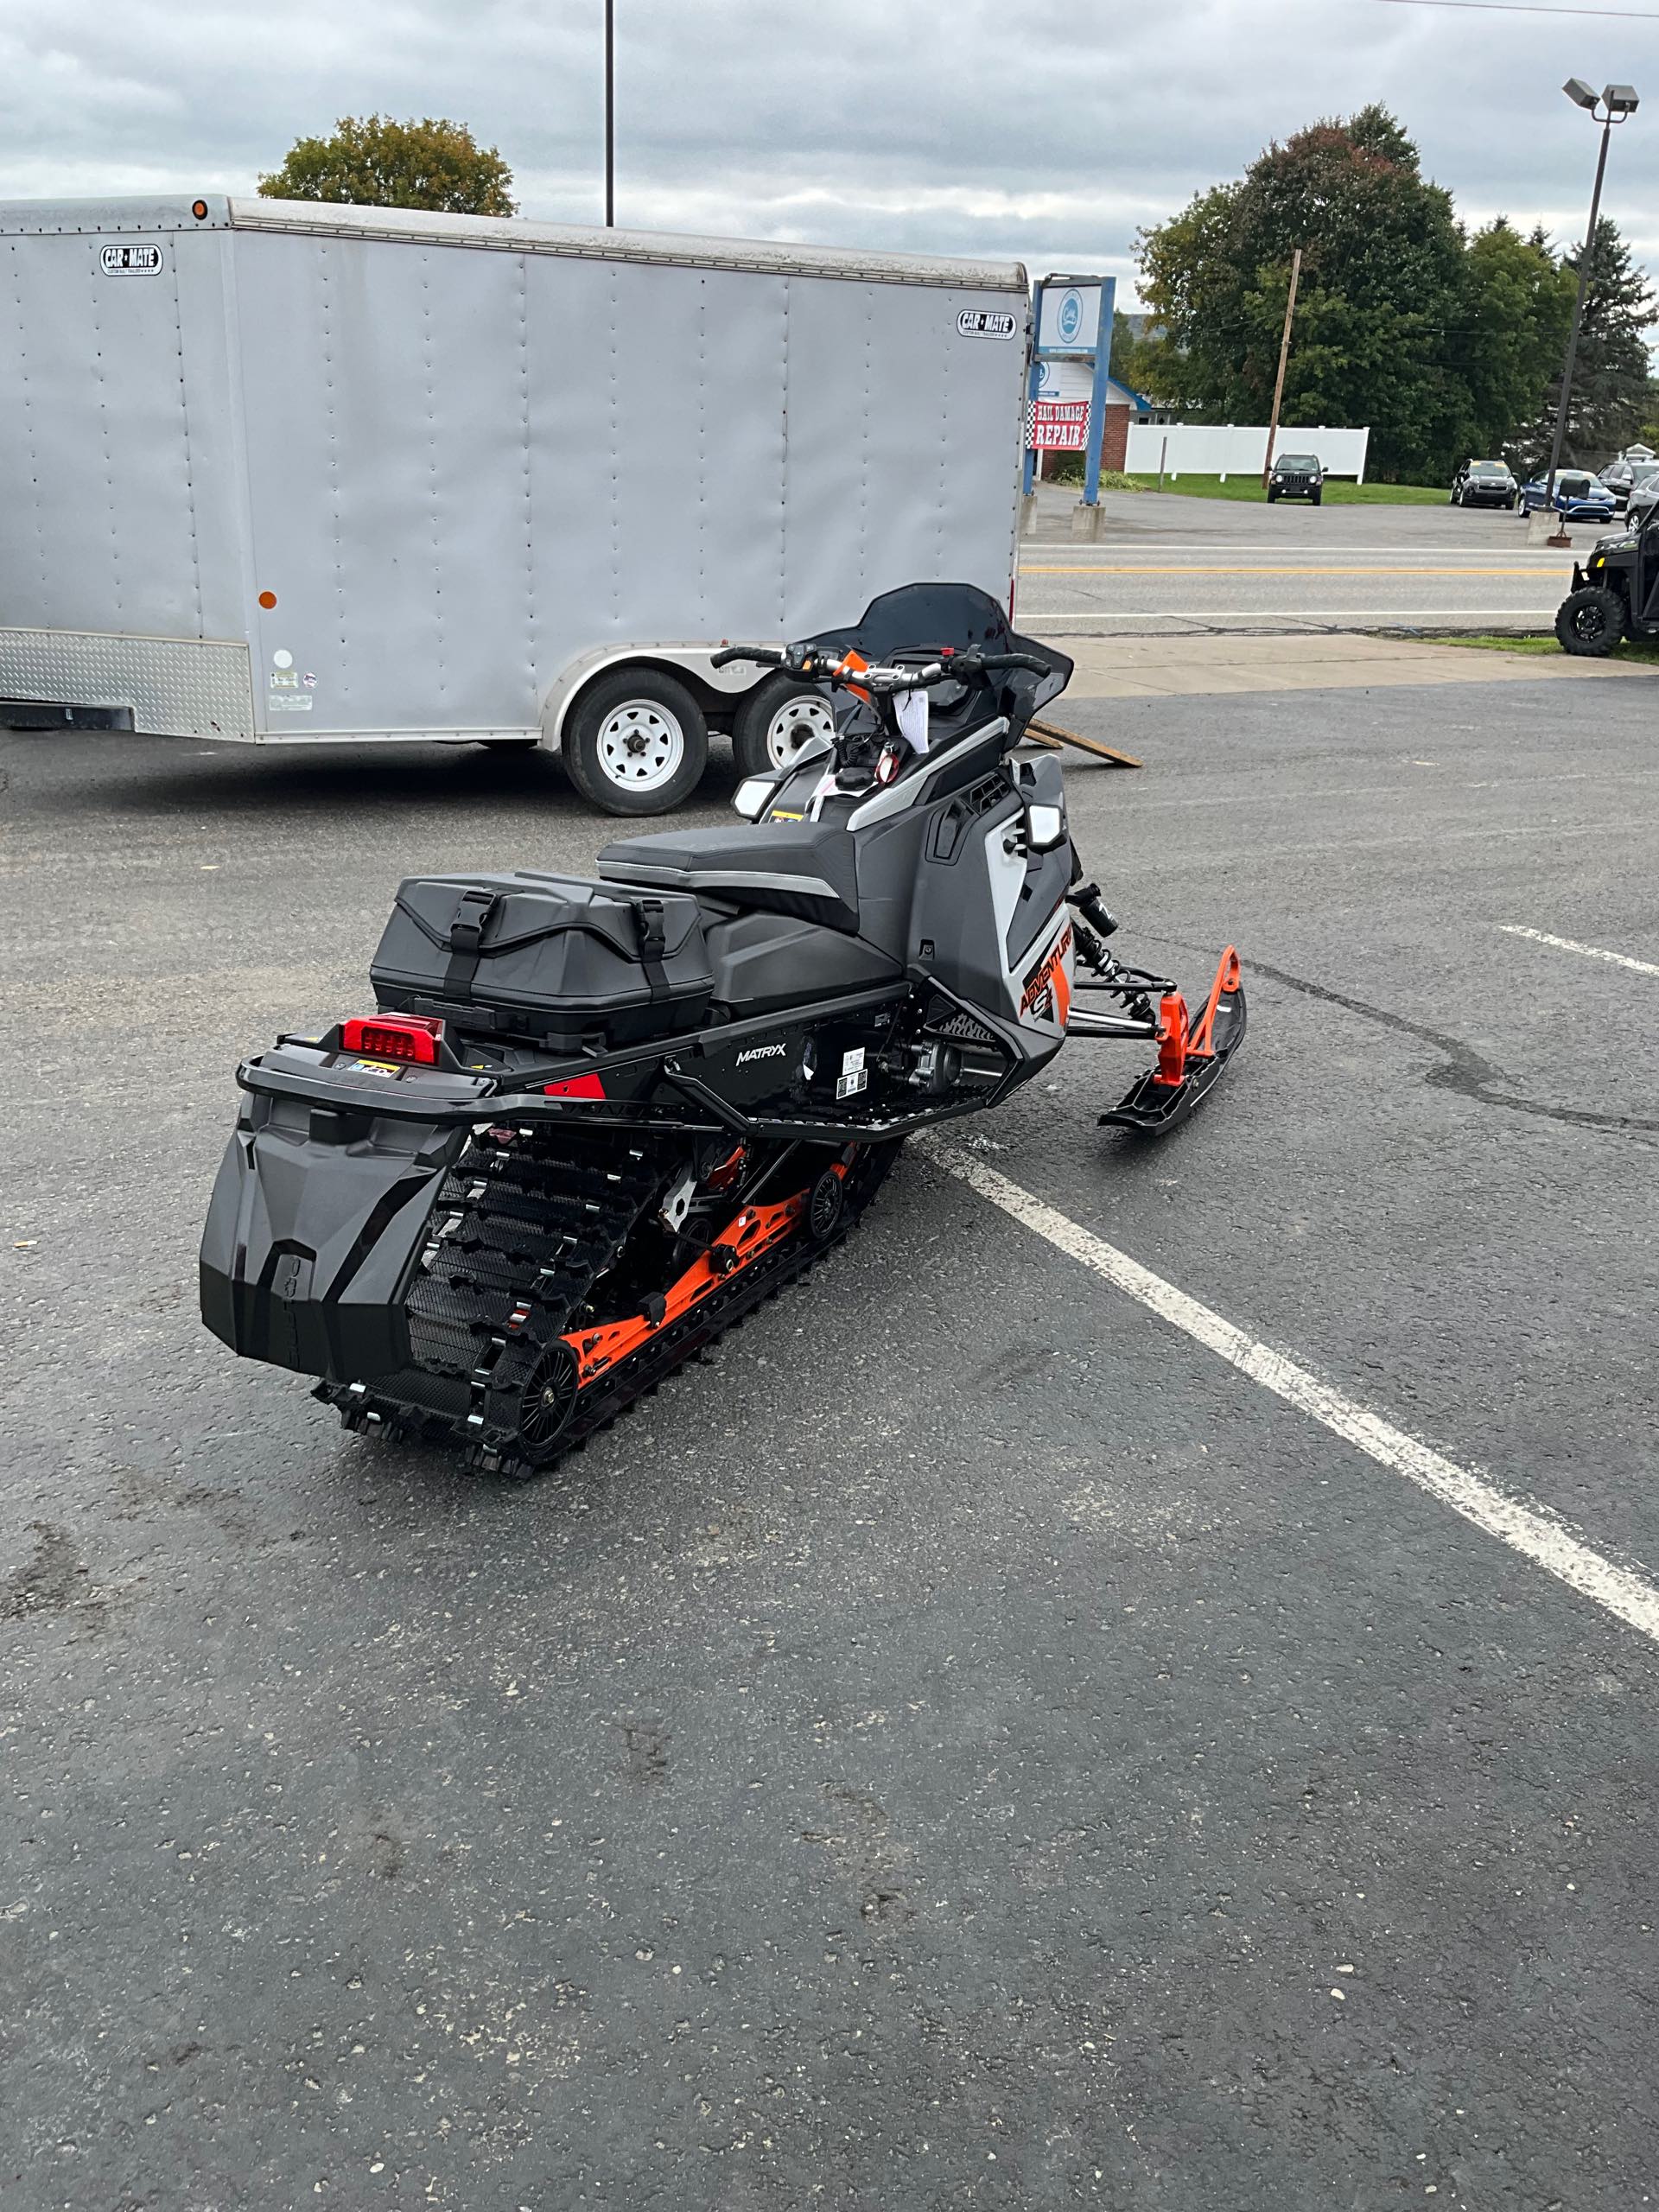 2023 Polaris INDY Adventure 137 ProStar S4 at Leisure Time Powersports of Corry